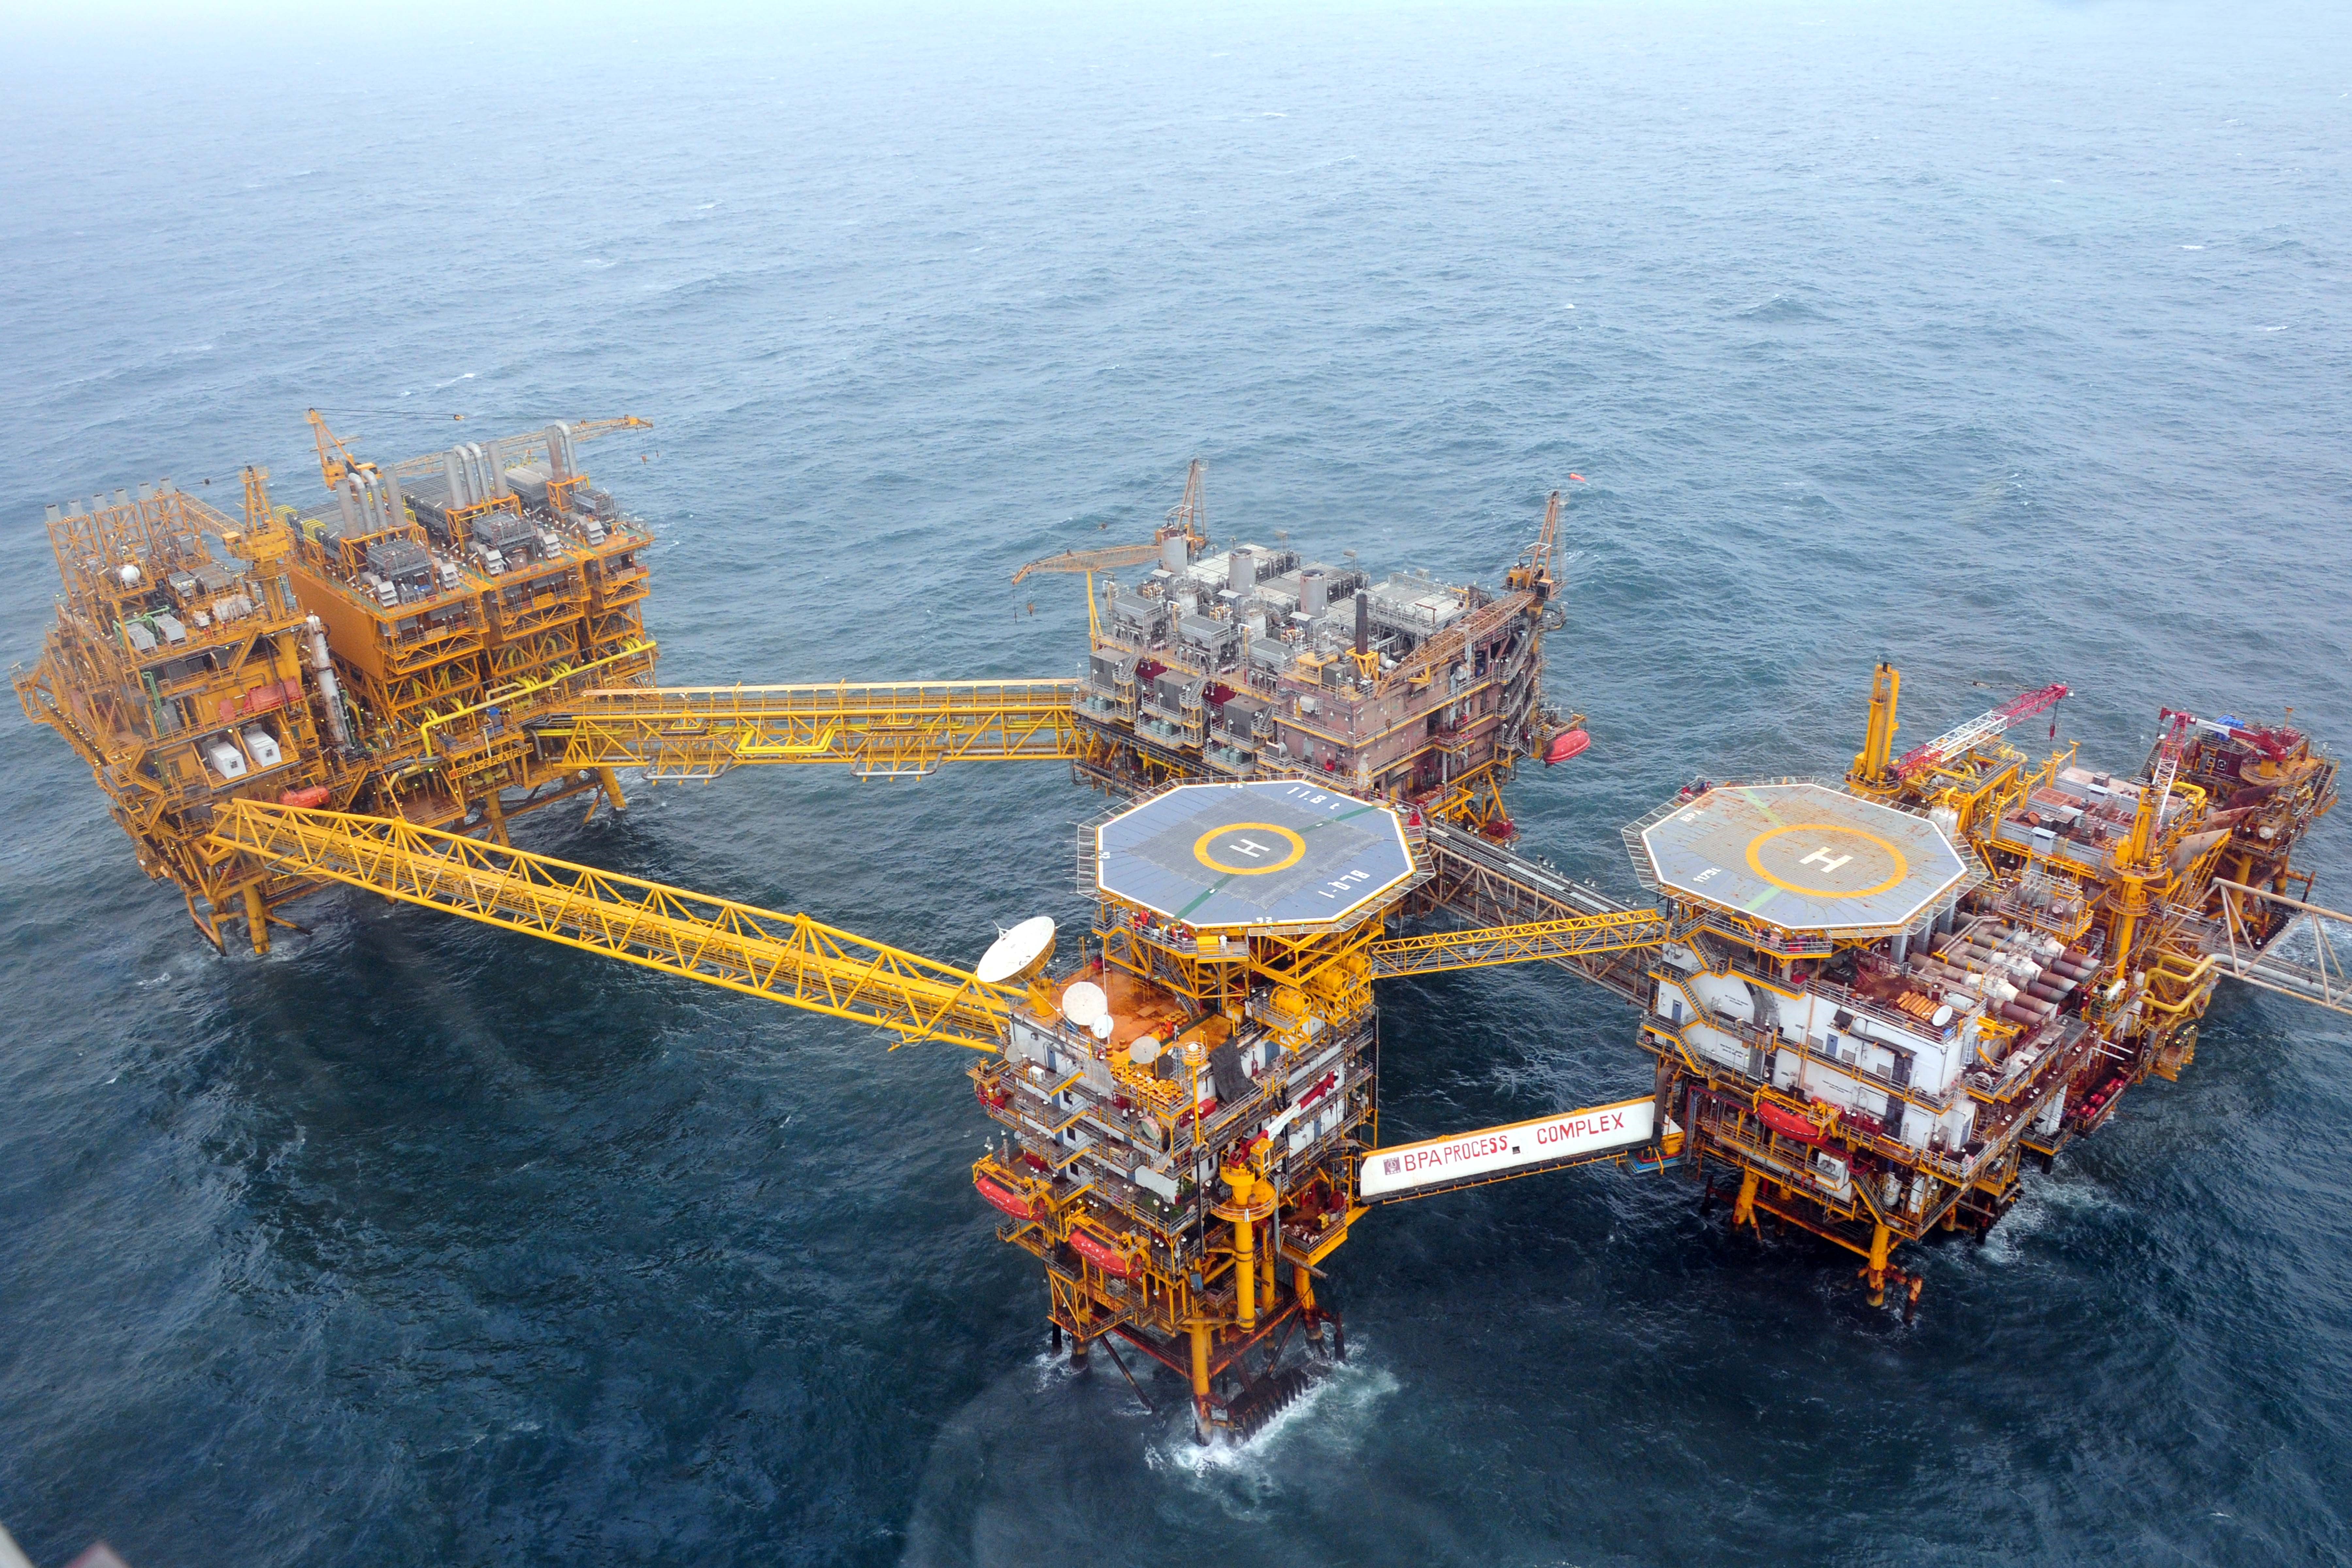 image is ONGC Offshore